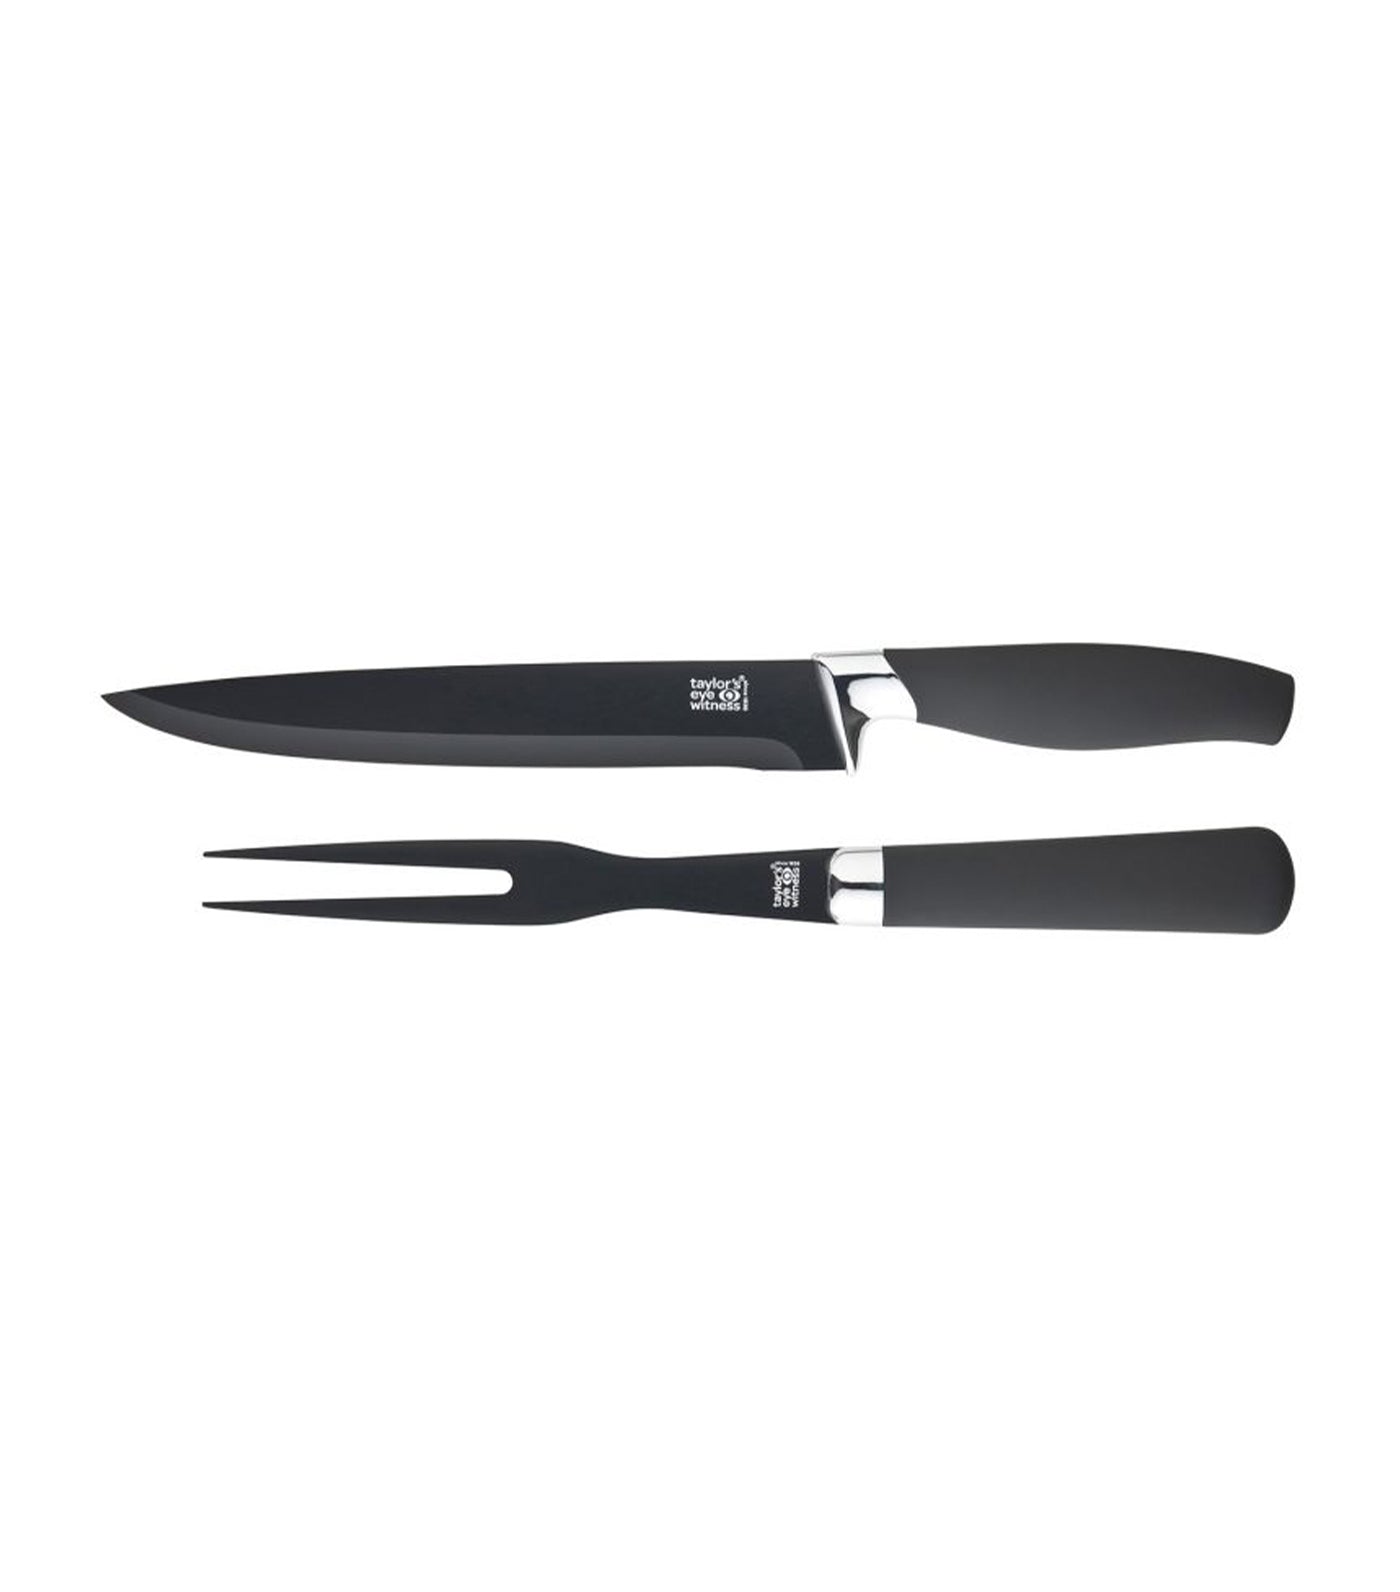 Taylor's Eye Witness 2-Piece Brooklyn® Chrome Ceramic-Coated Carving Knife & Fork Set